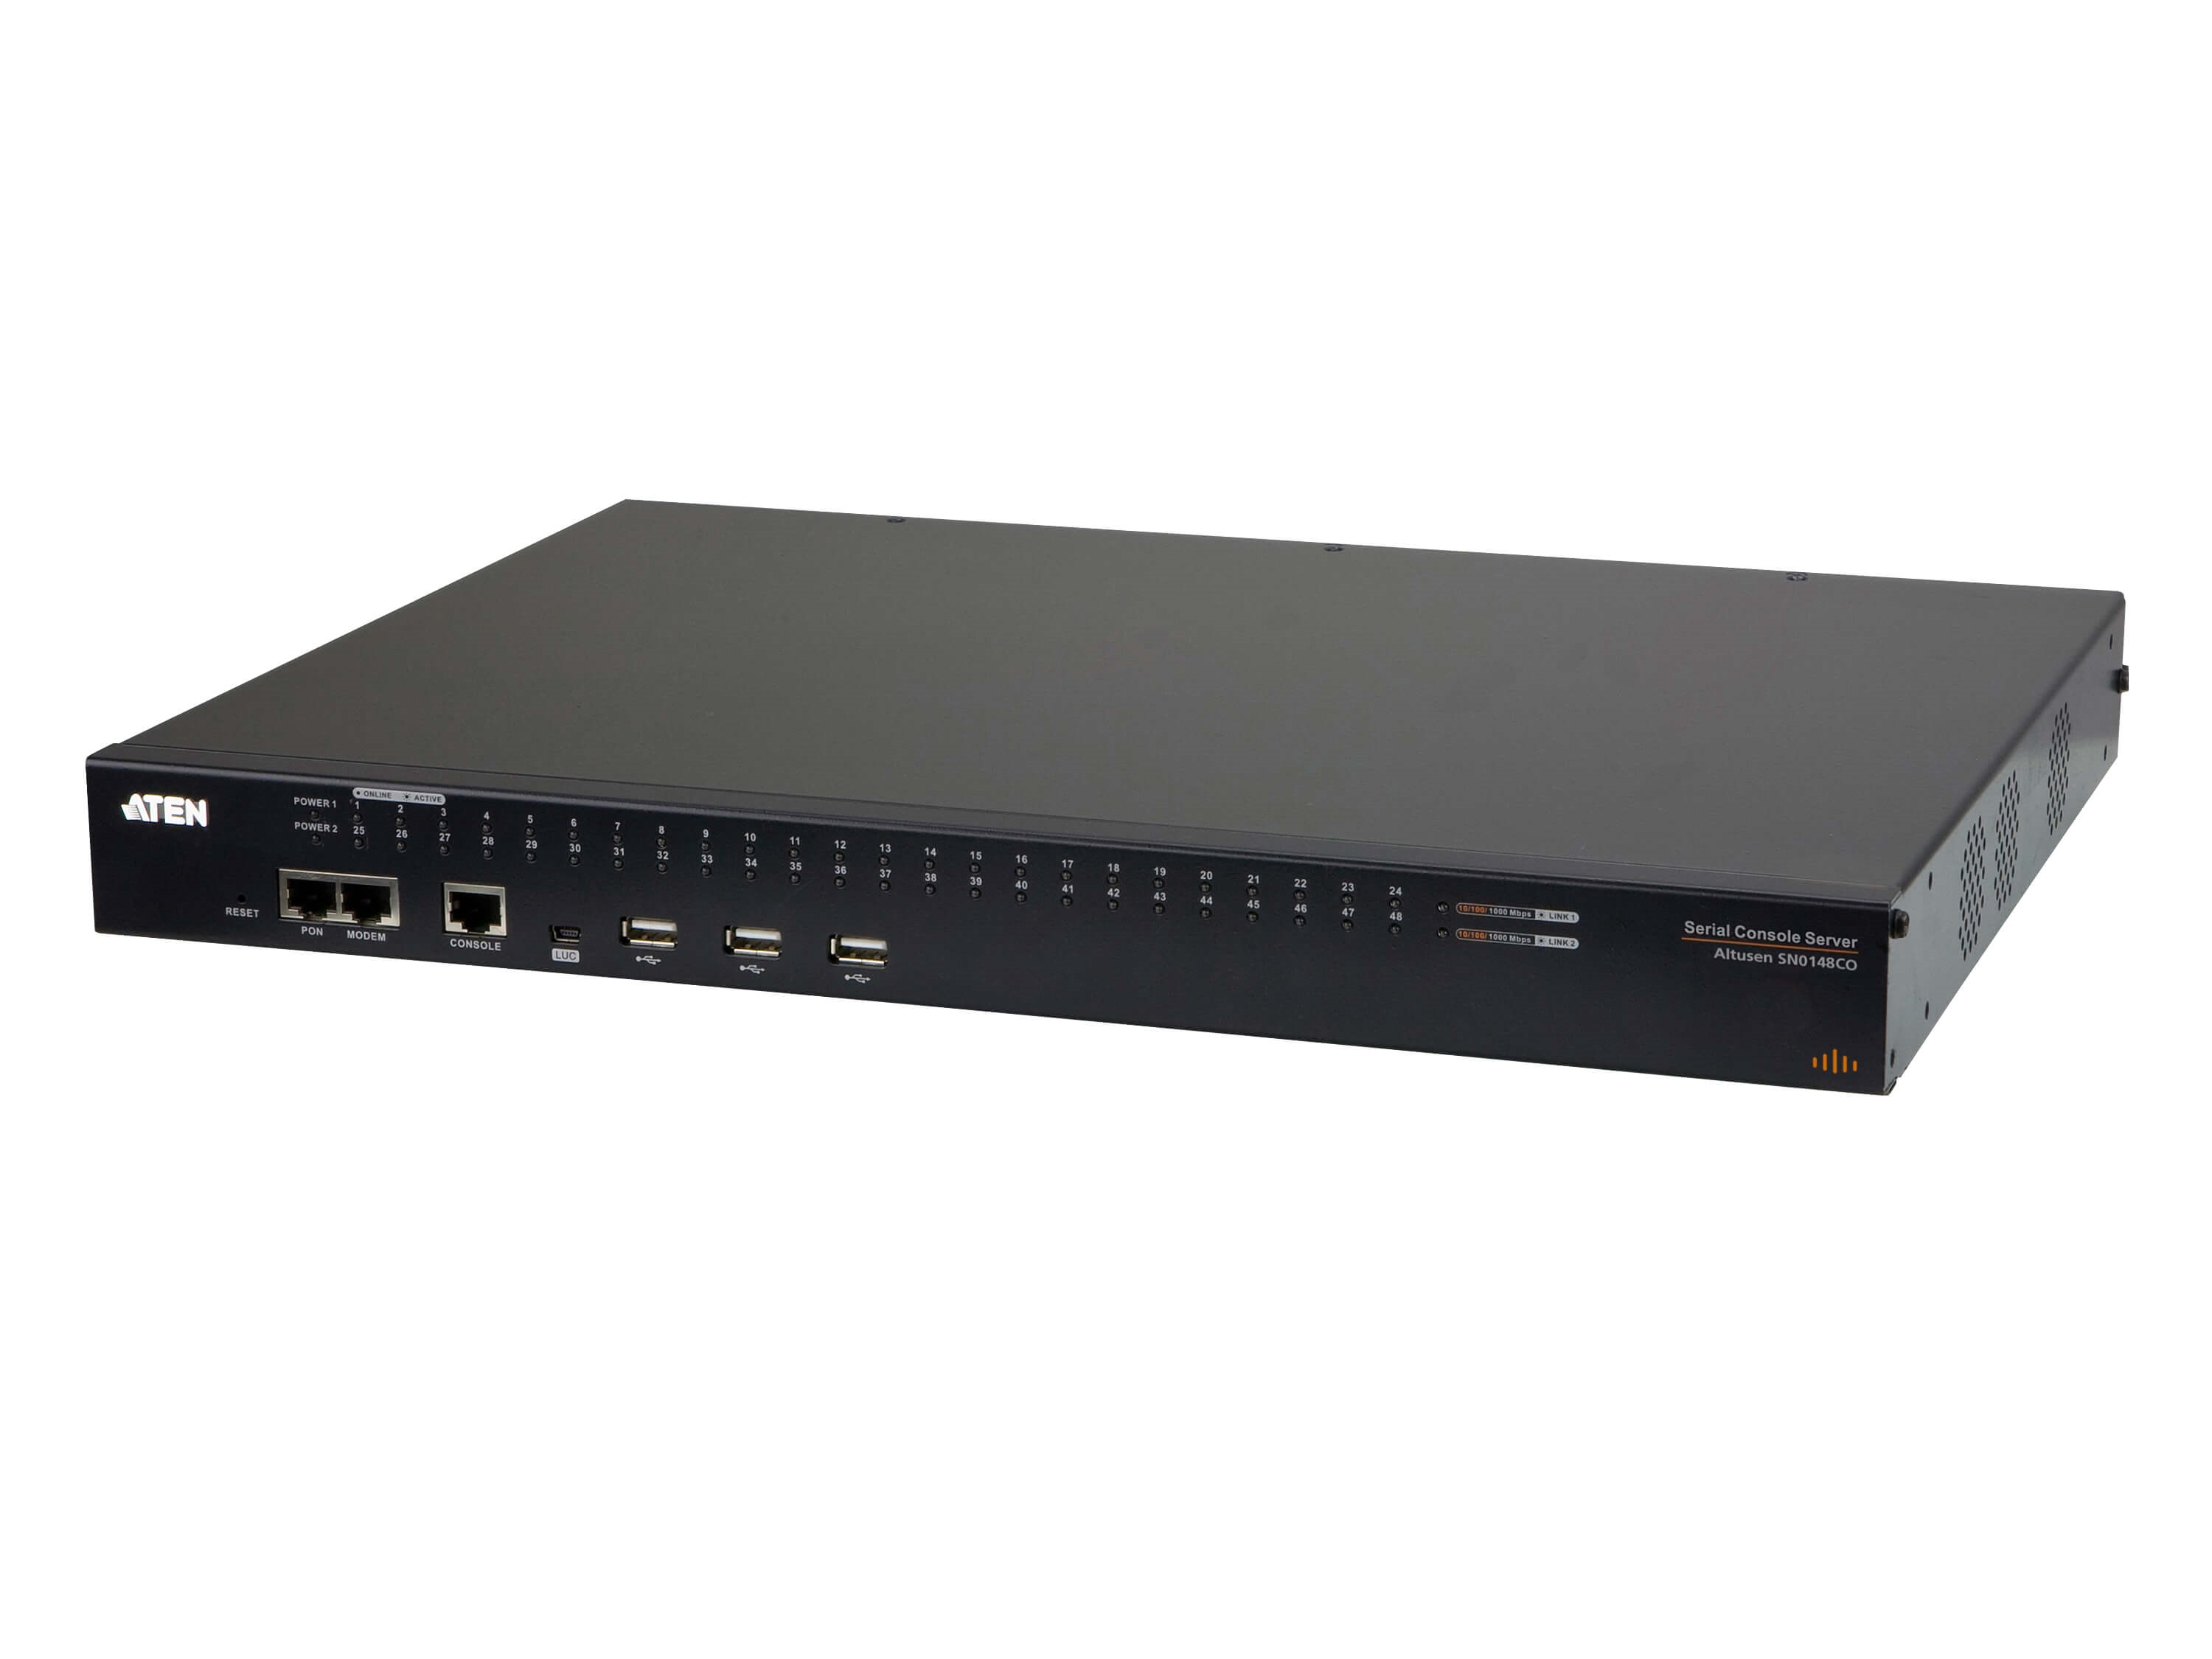 Aten SN0148COD 48-Port Serial Console Server with Dual Power/LAN/DC Power